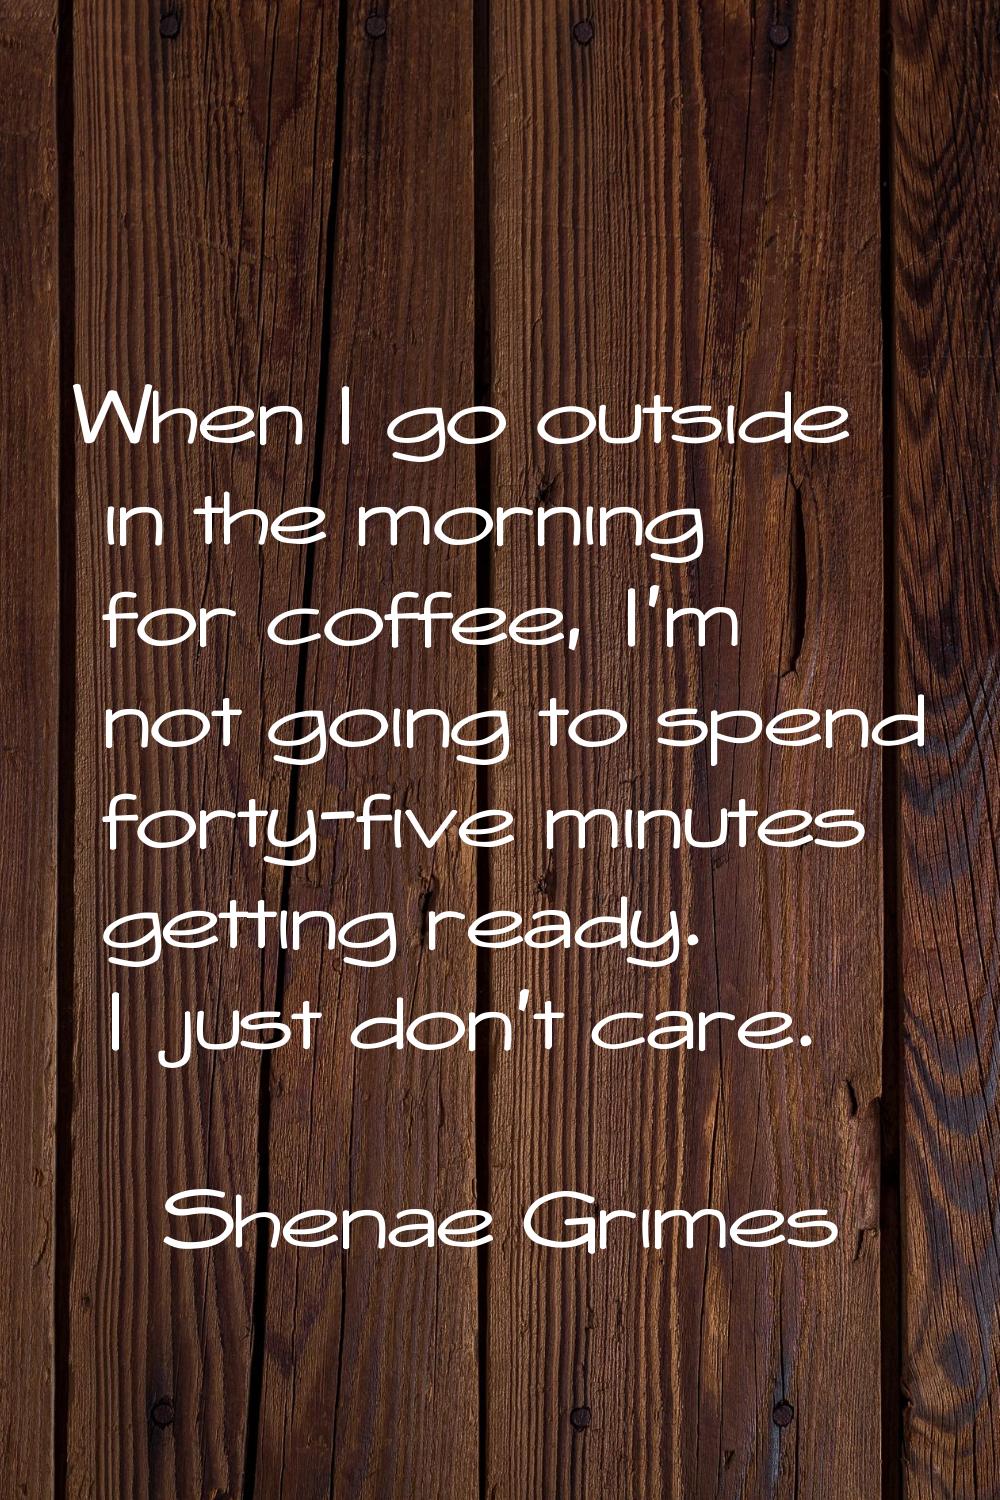 When I go outside in the morning for coffee, I'm not going to spend forty-five minutes getting read